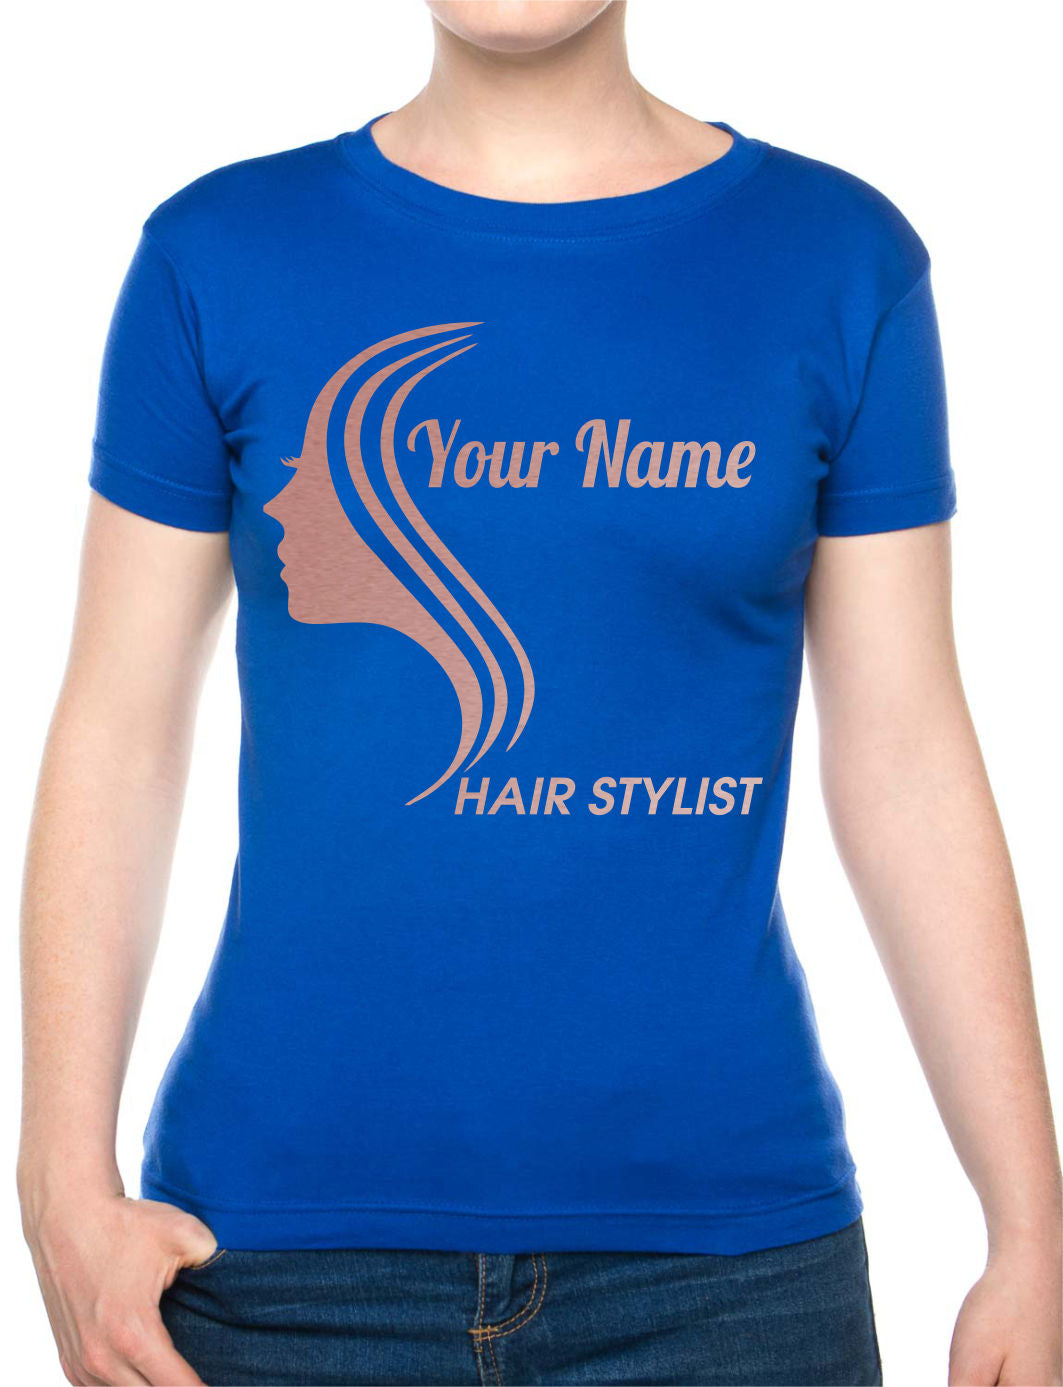 Personalised Ladies T-Shirt Hair Stylist Any Name Work Tee For Hairdresser